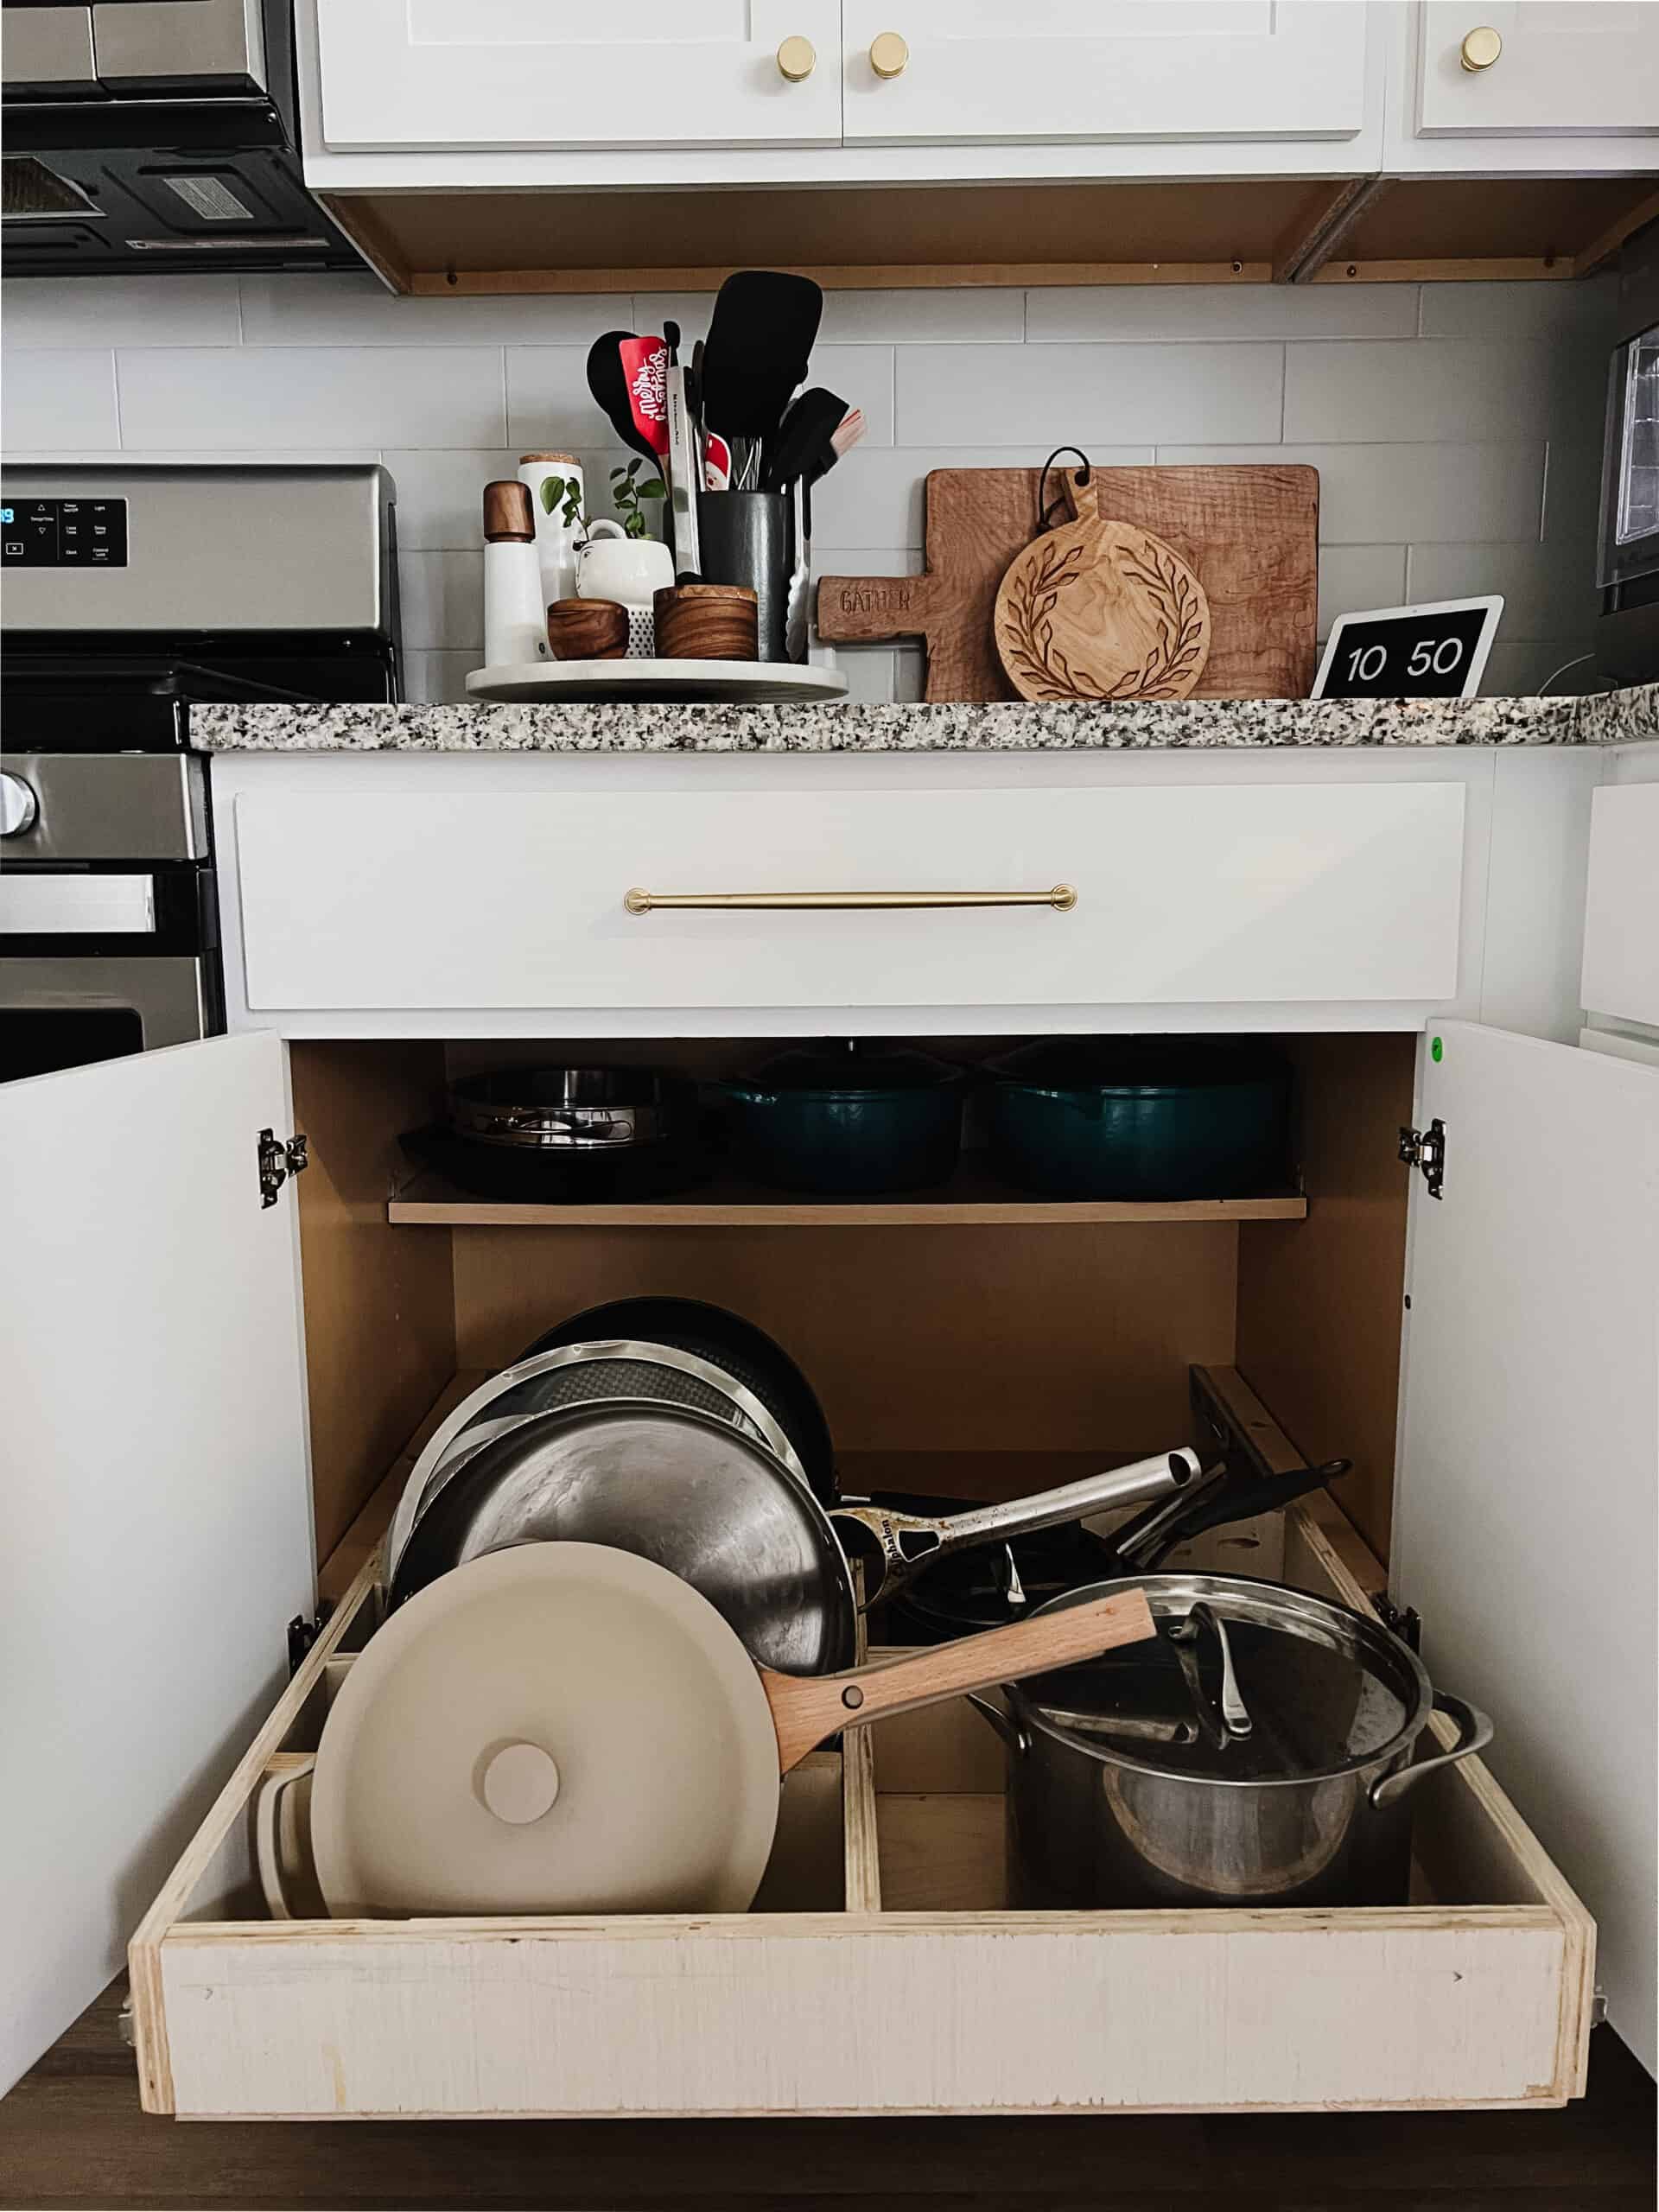 Kitchen cabinet with DIY pull-out pot and pan organizer